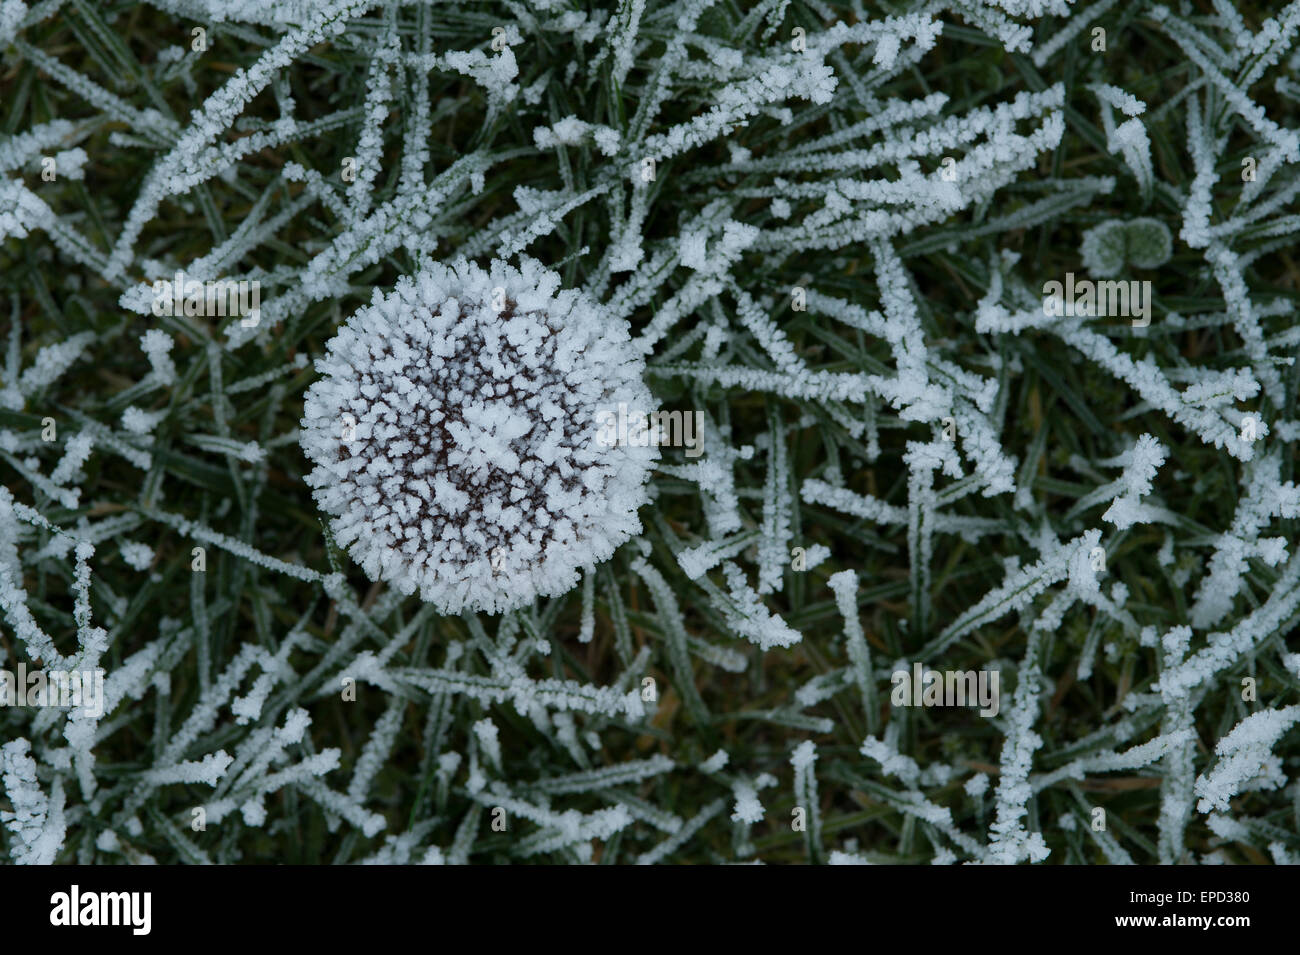 Frozen grass with mushroom covered with ice crystals Stock Photo